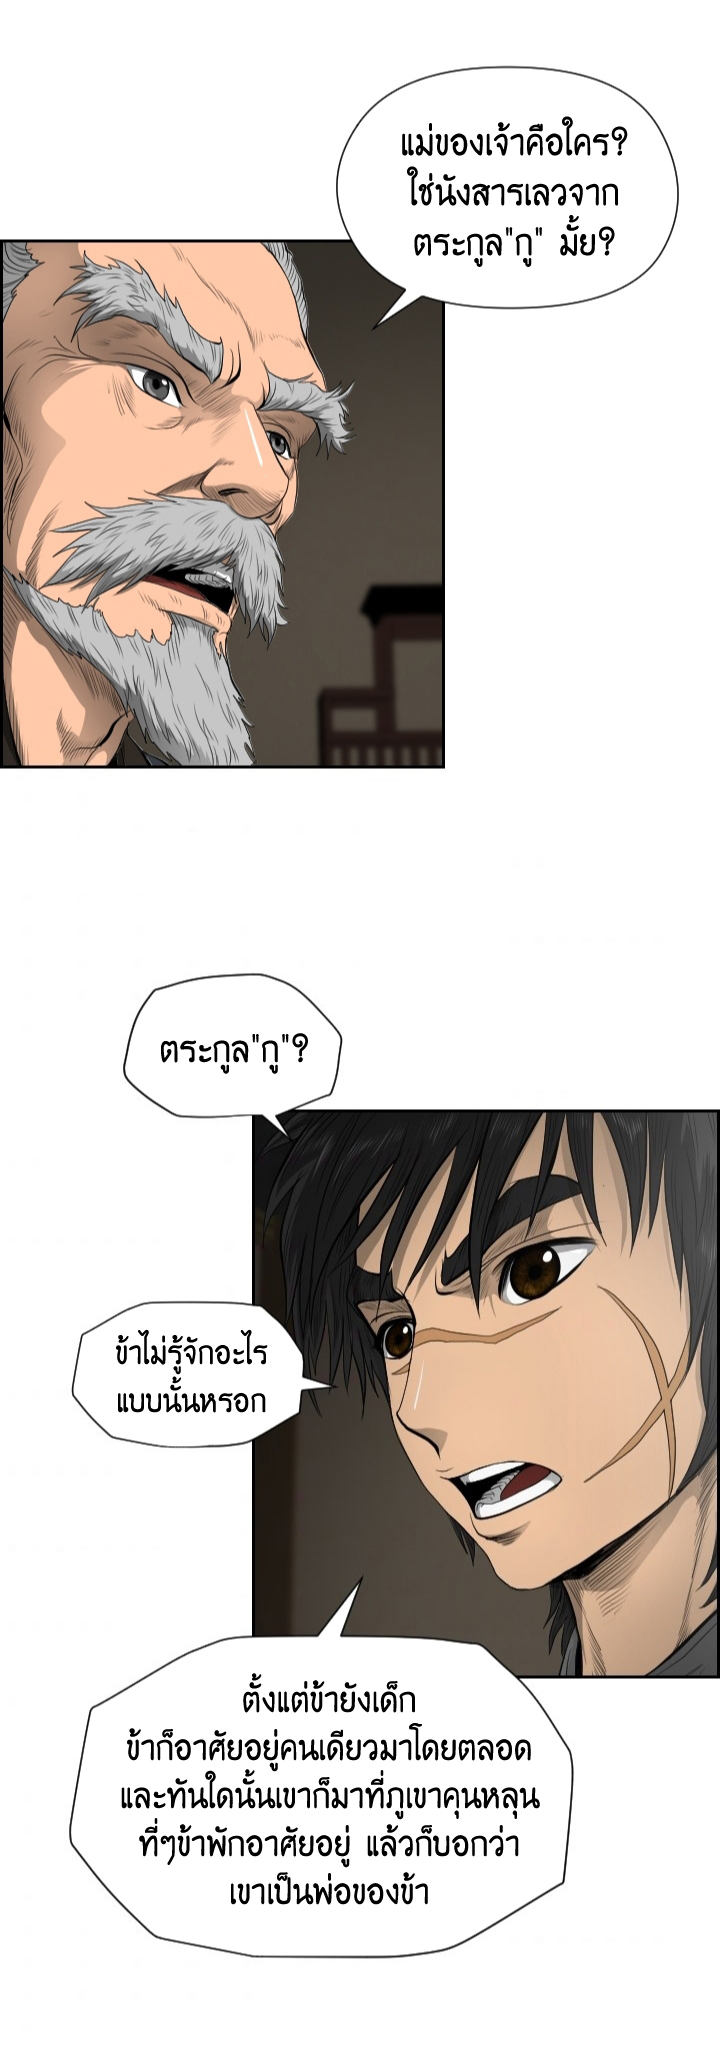 Blade Of Wind and Thunder 16 (31)